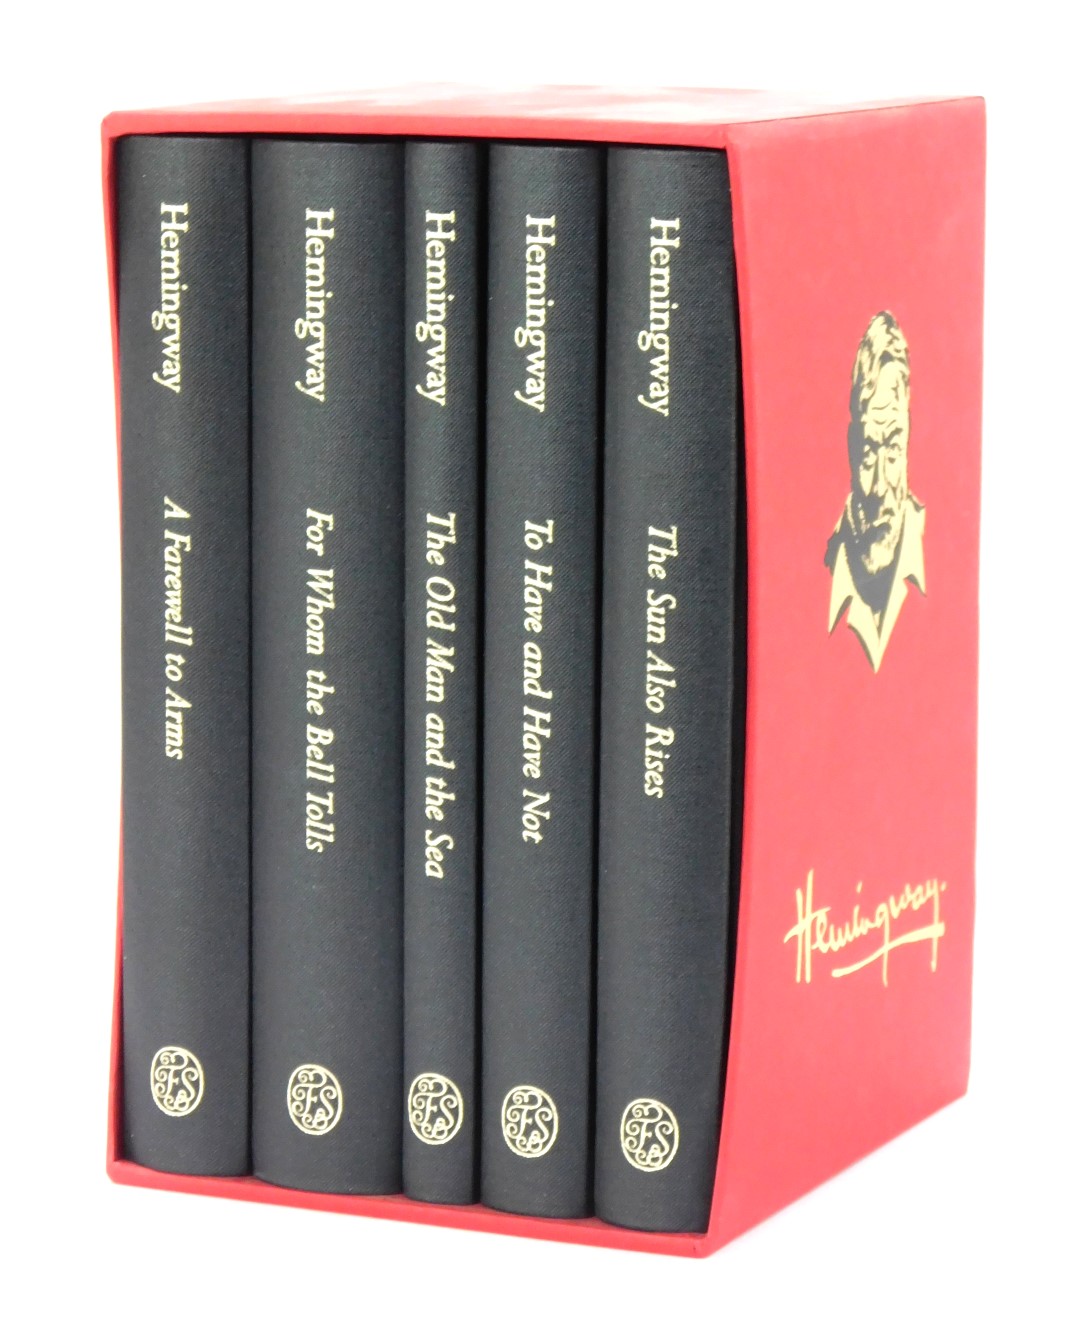 Hemingway (Ernest). The Works, 5 vols, with slip case, published by The Folio Society 1999.